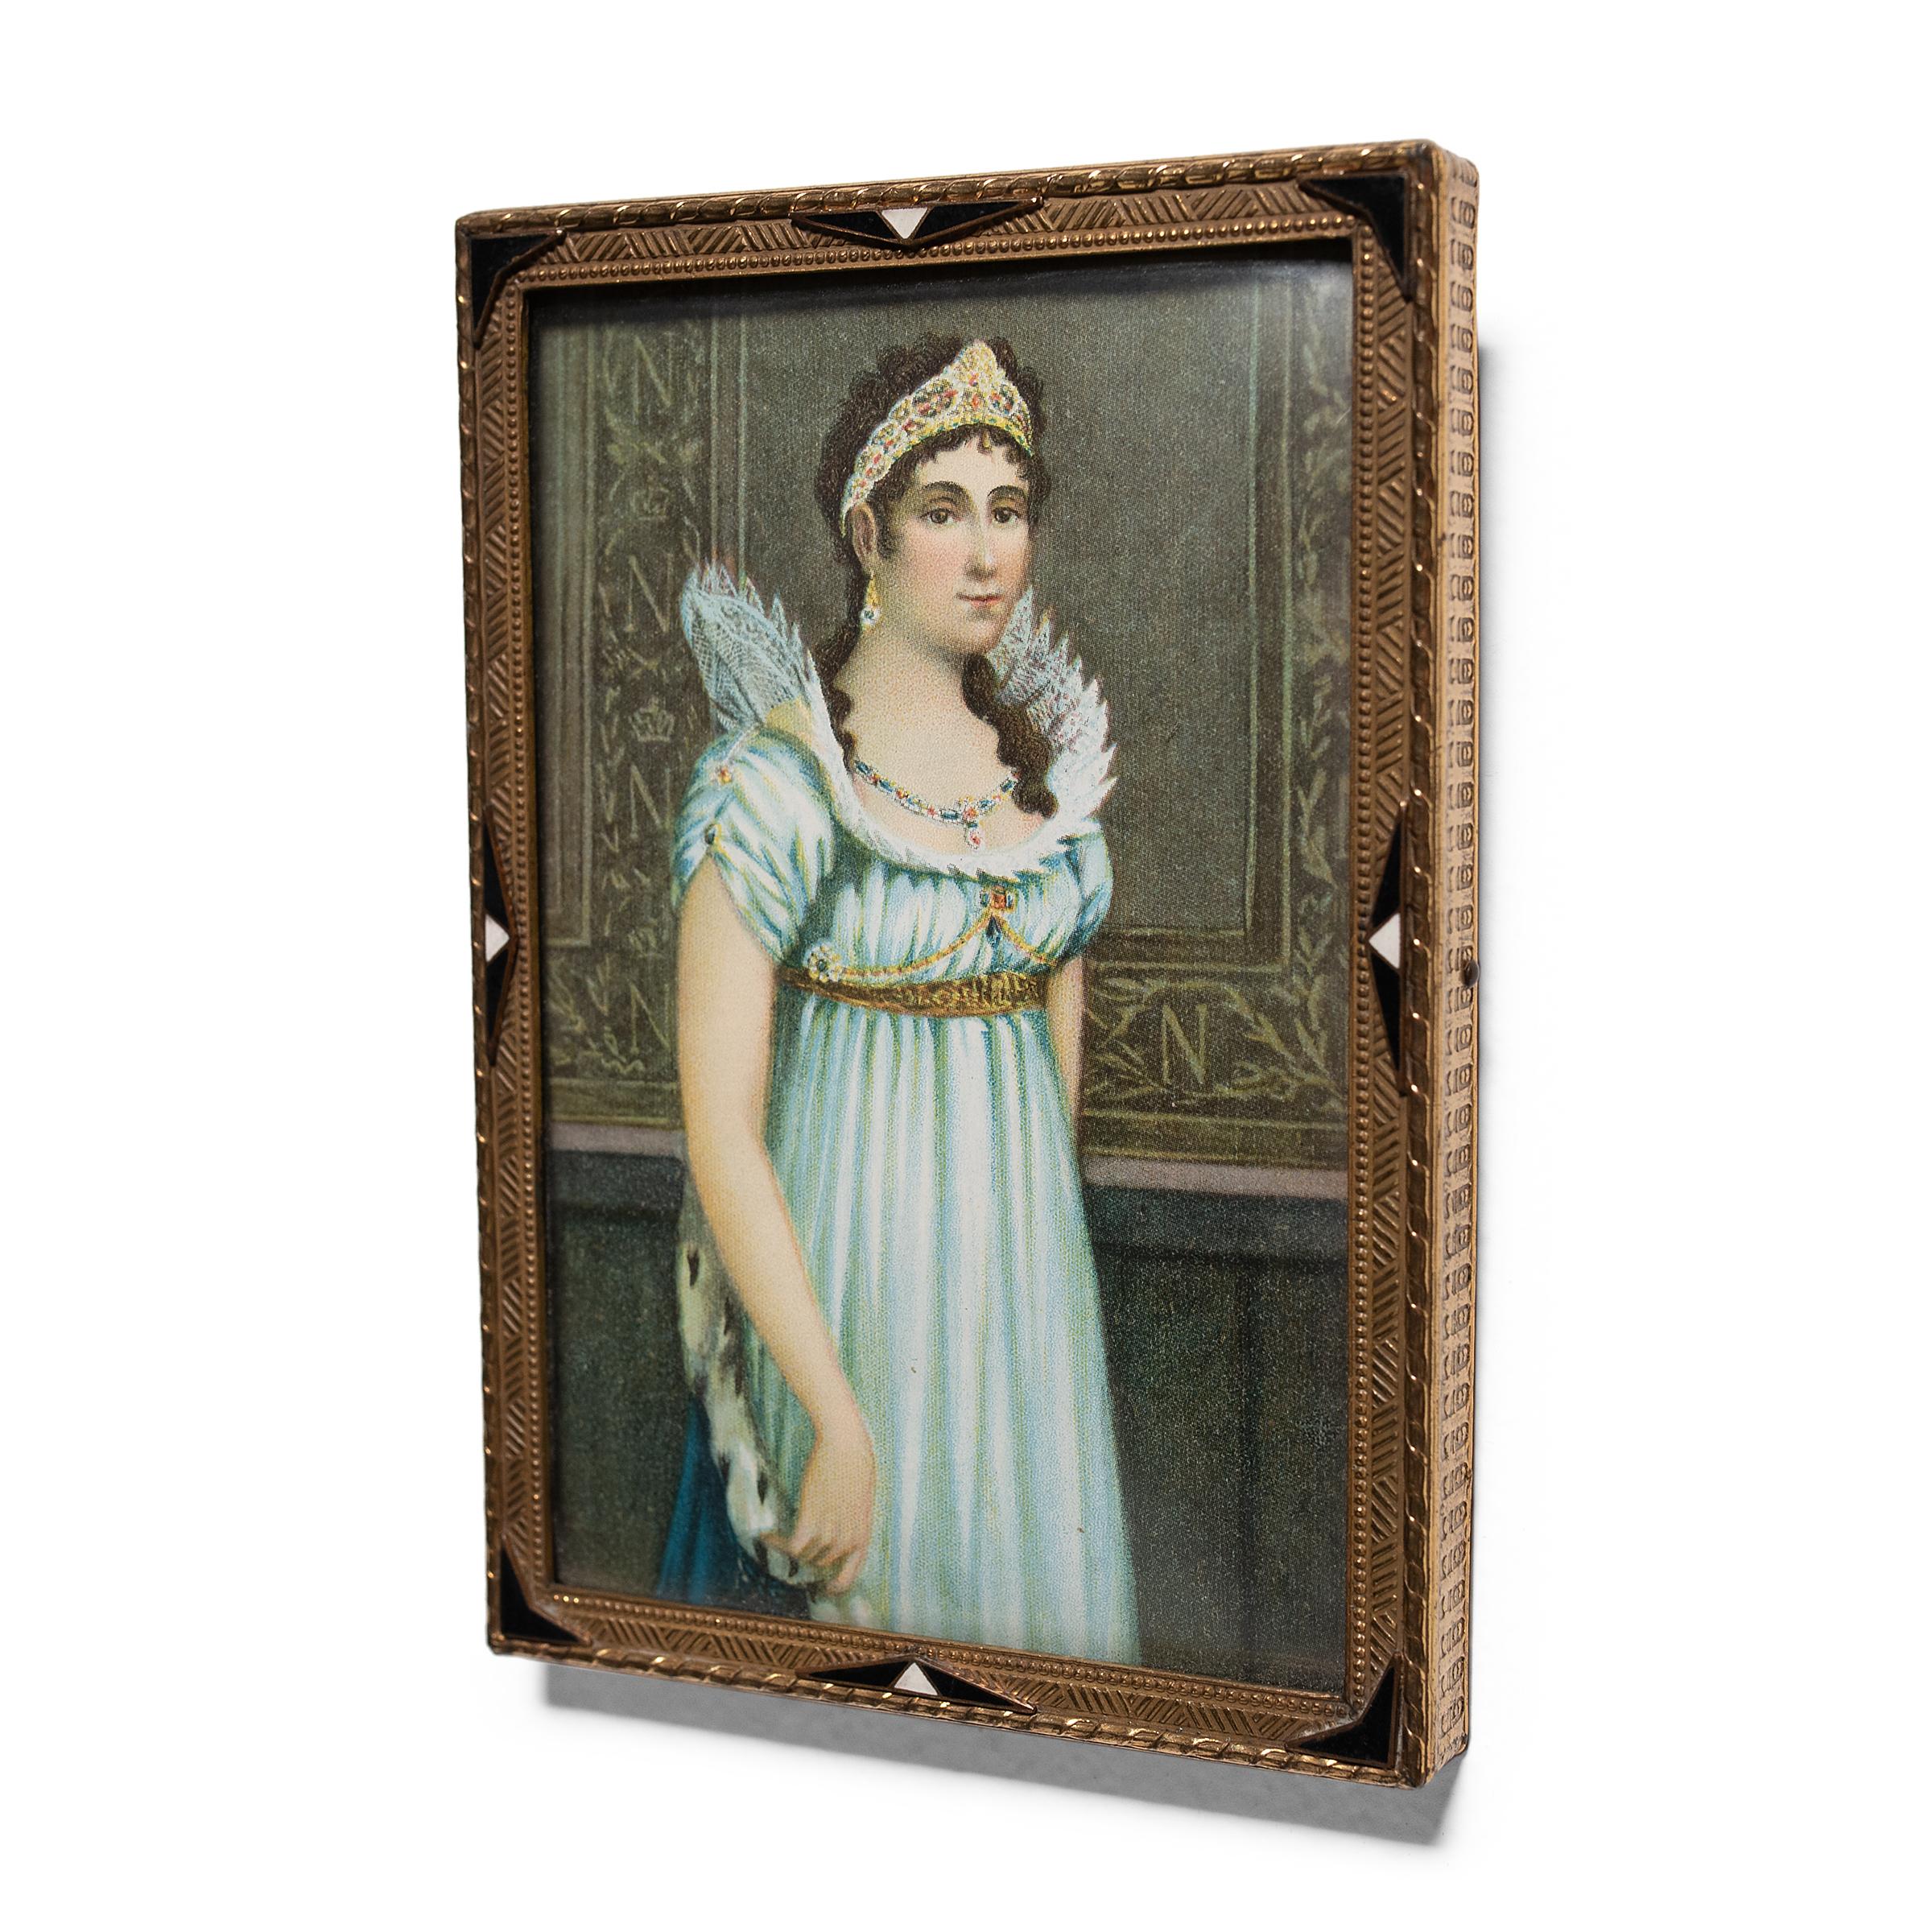 Encased in a geometric Art Deco frame, this small printed portrait depicts a young woman of French royalty, most likely Empress Josephine Bonaparte. Josephine Bonaparte was the Empress of France as the first wife of Emperor Napoleon Bonaparte